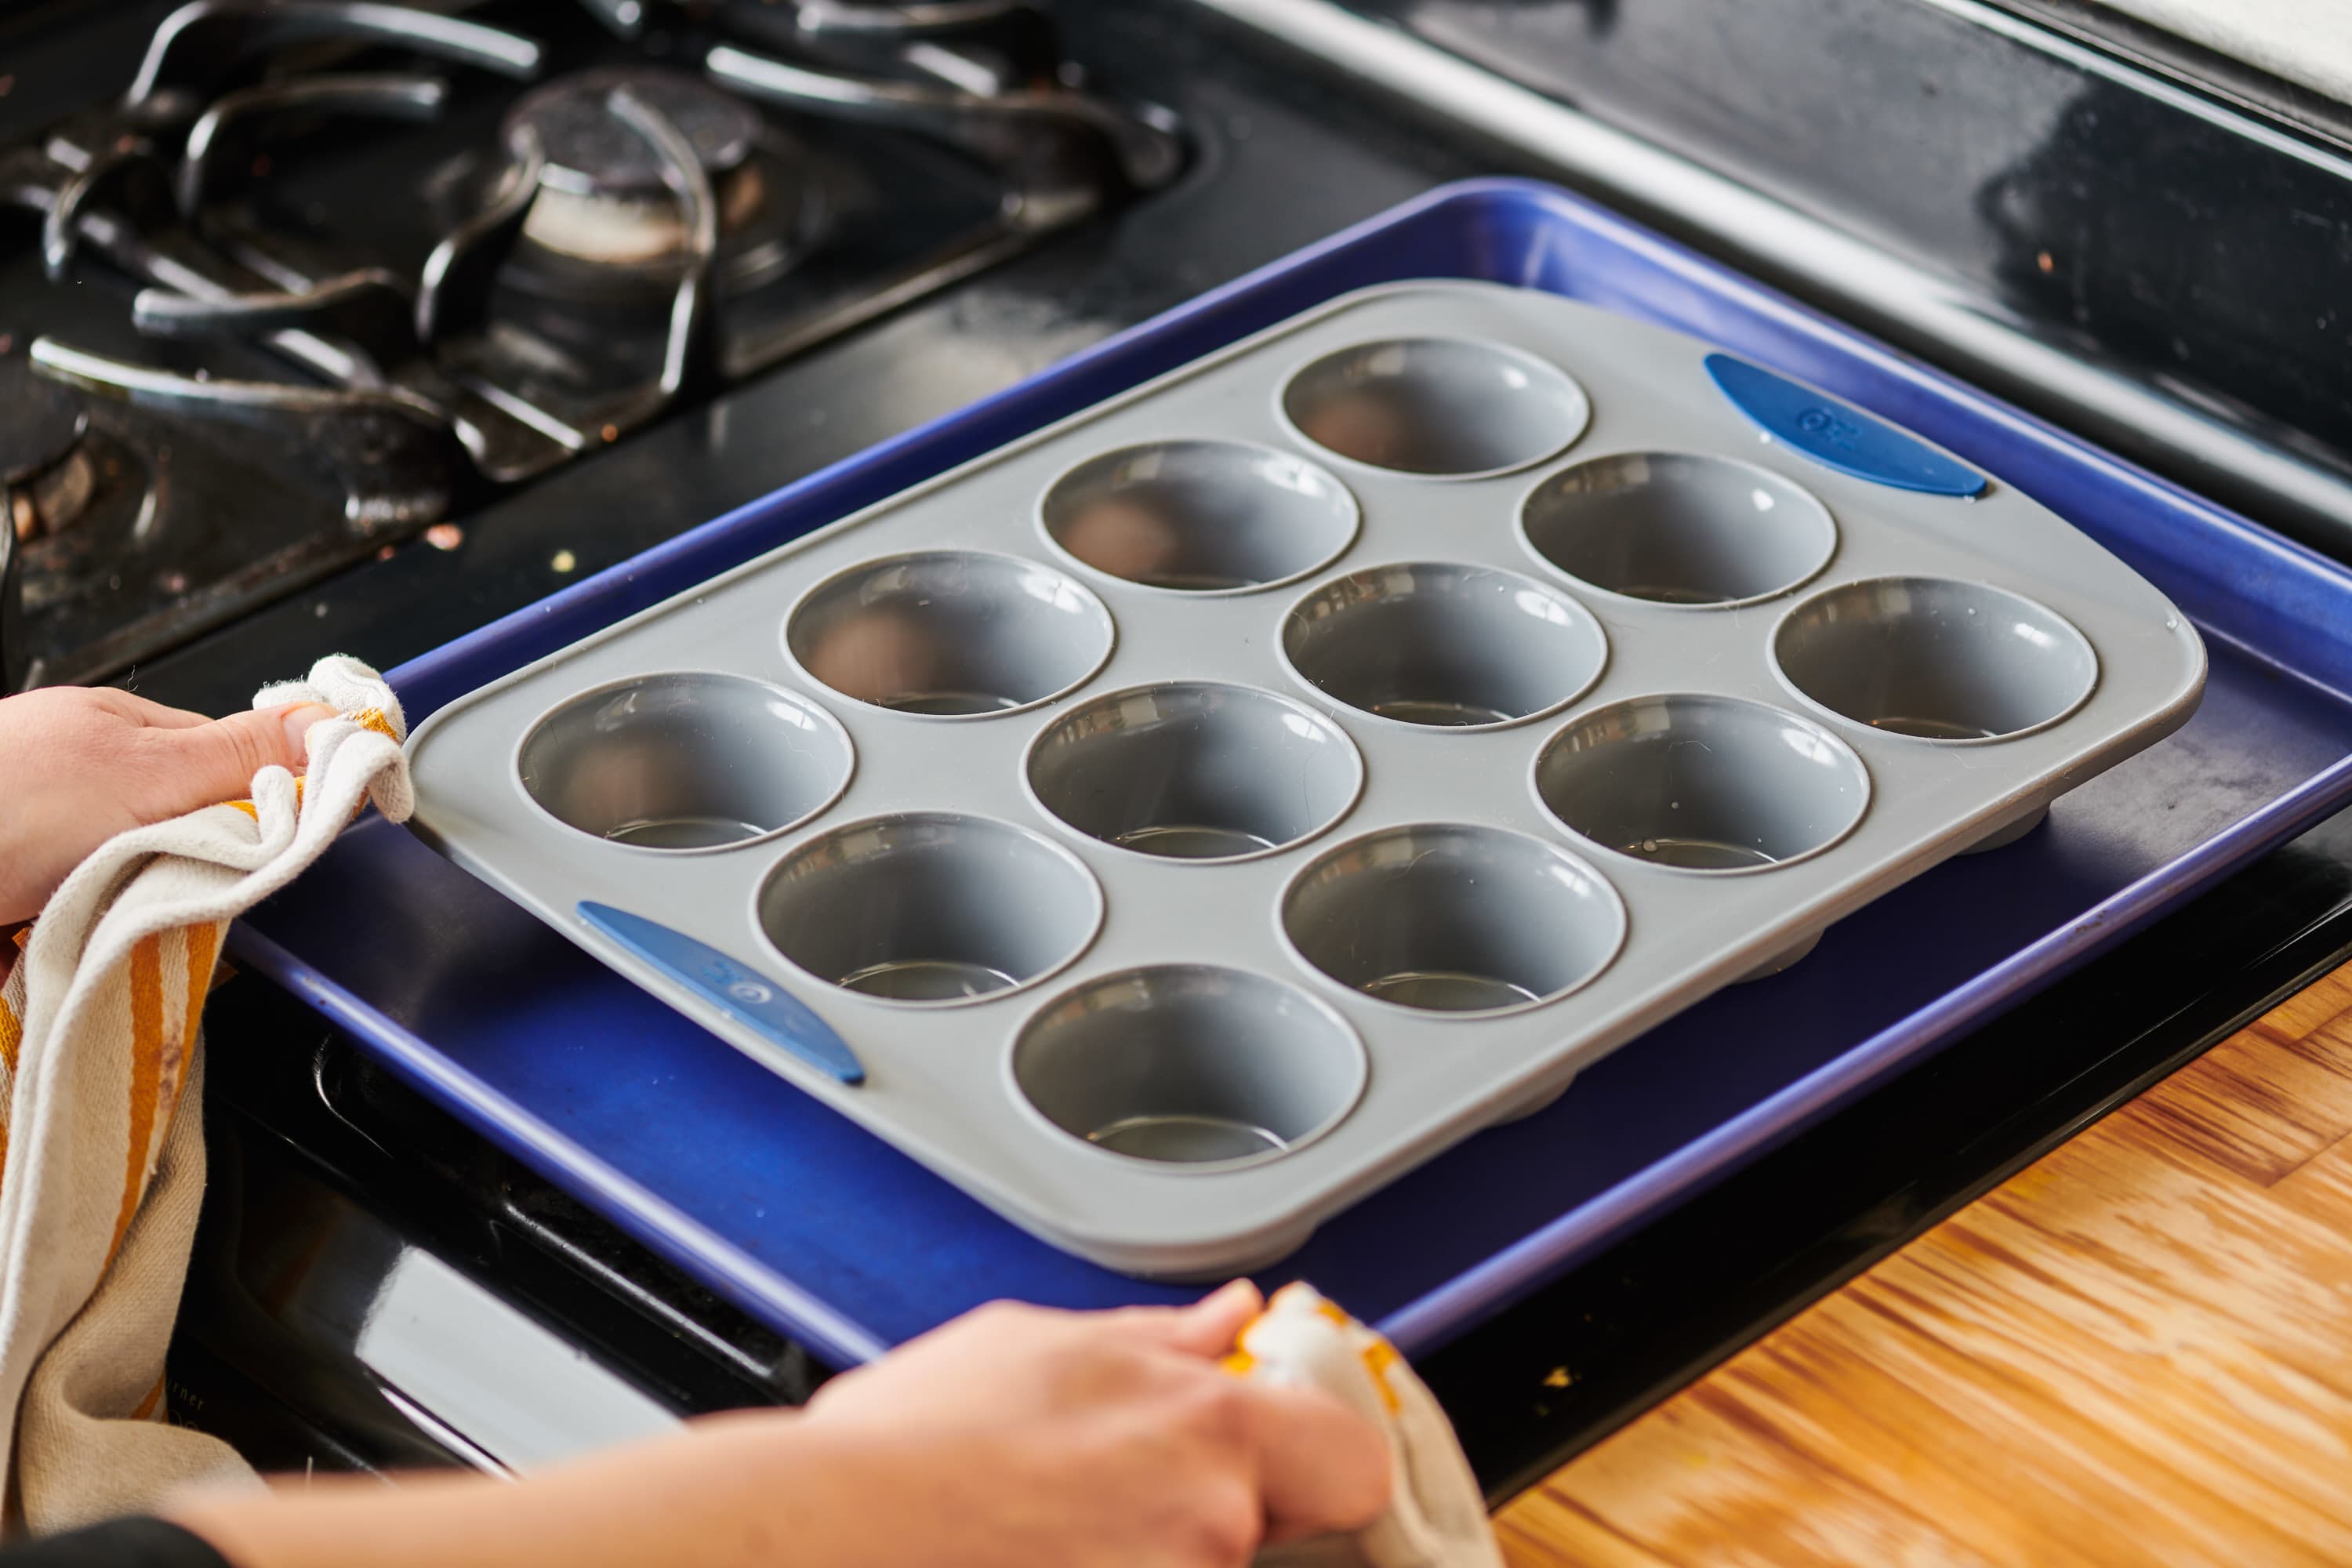 Why do my silicone baking molds smell funny? How to freshen up the